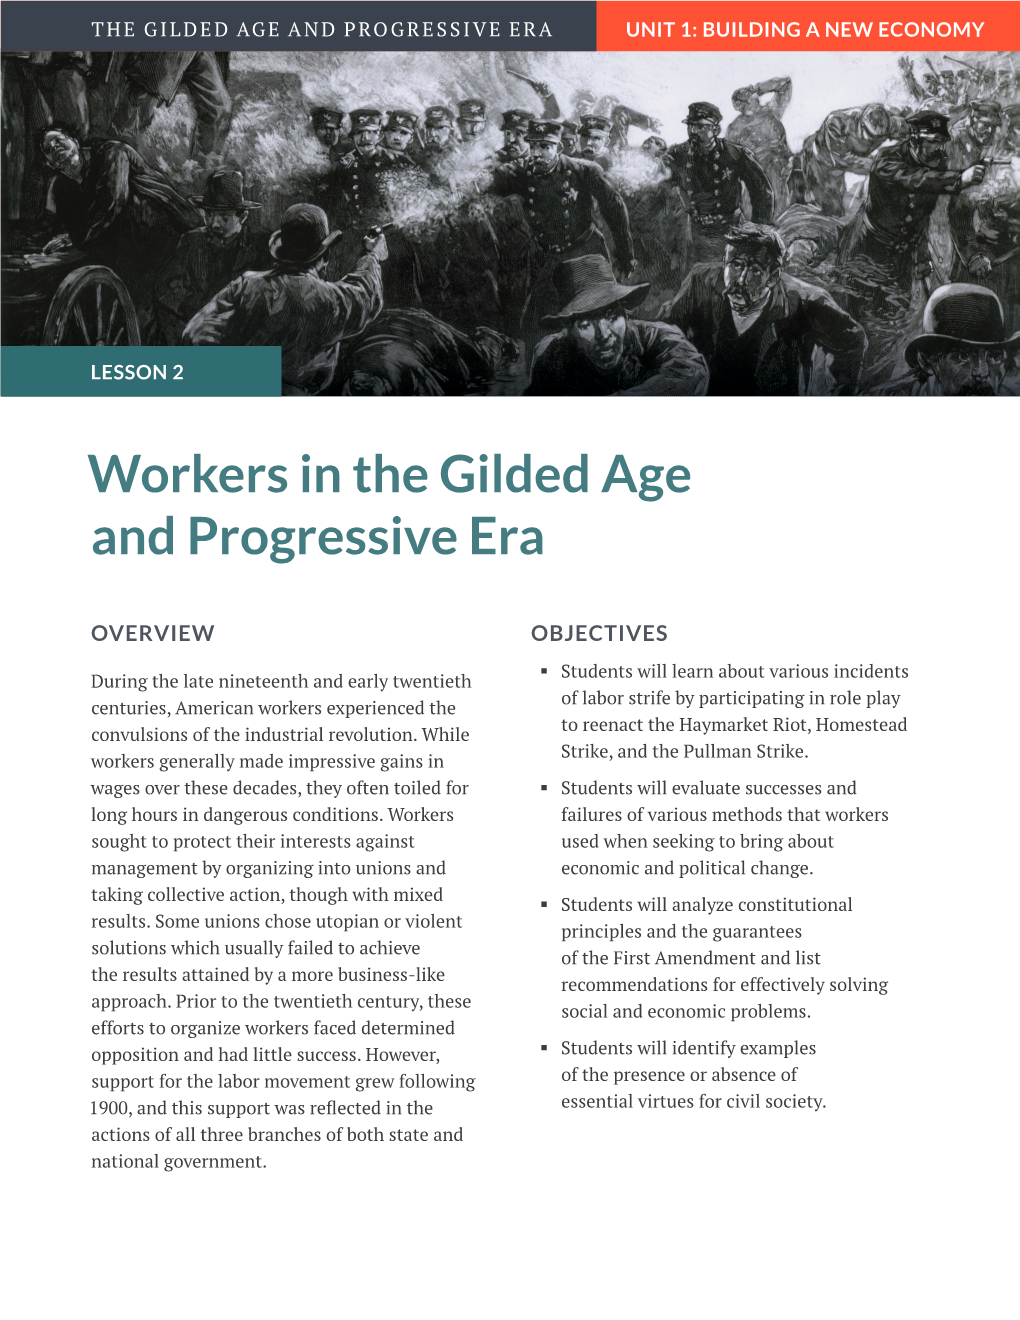 Workers in the Gilded Age and Progressive Era